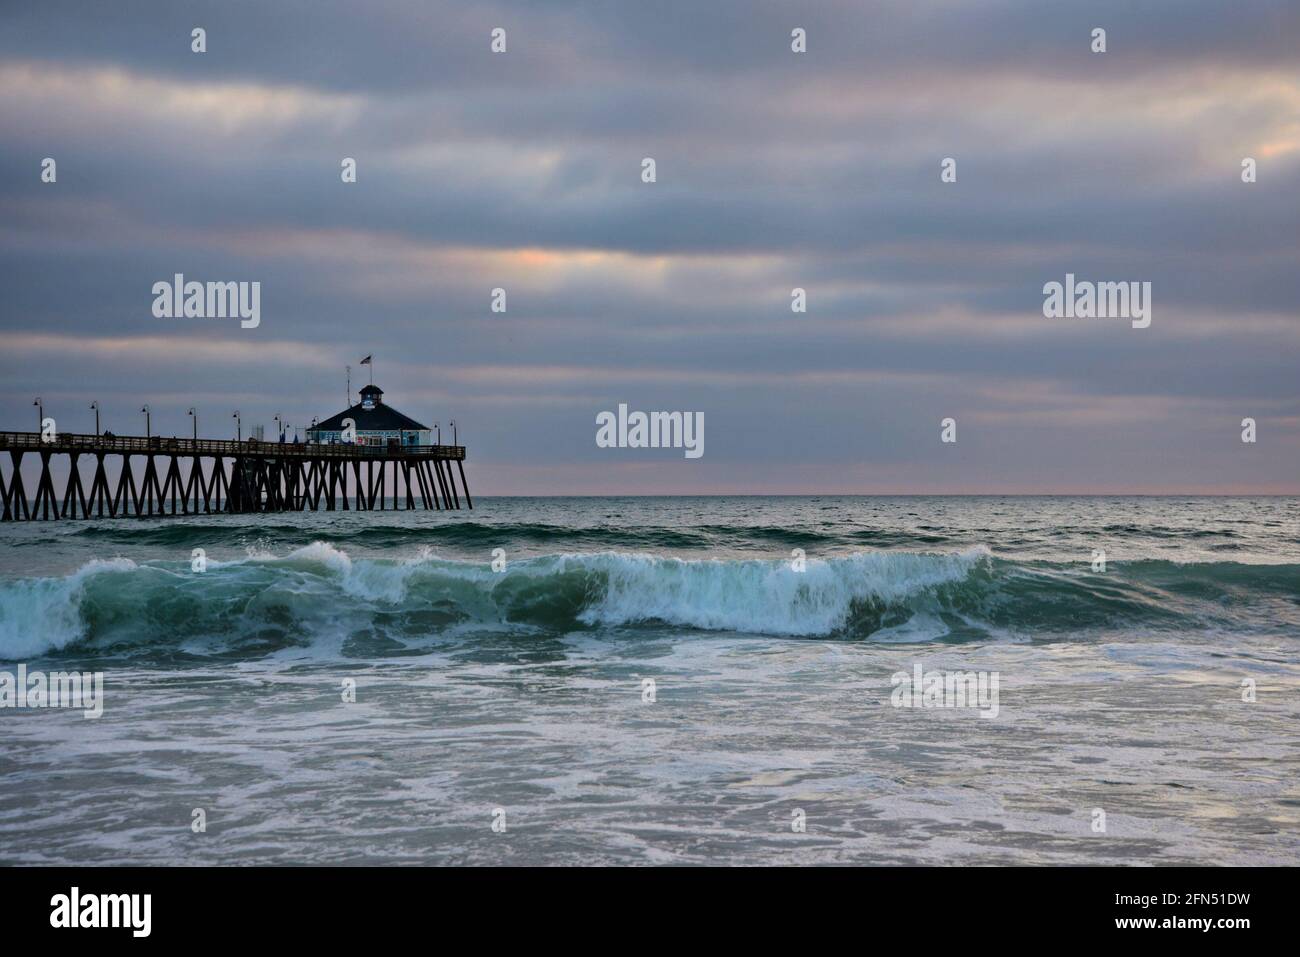 Cloudy day seascape with panoramic view of Imperial Beach Pier and the Tin Fish Restaurant in San Diego, California USA. Stock Photo